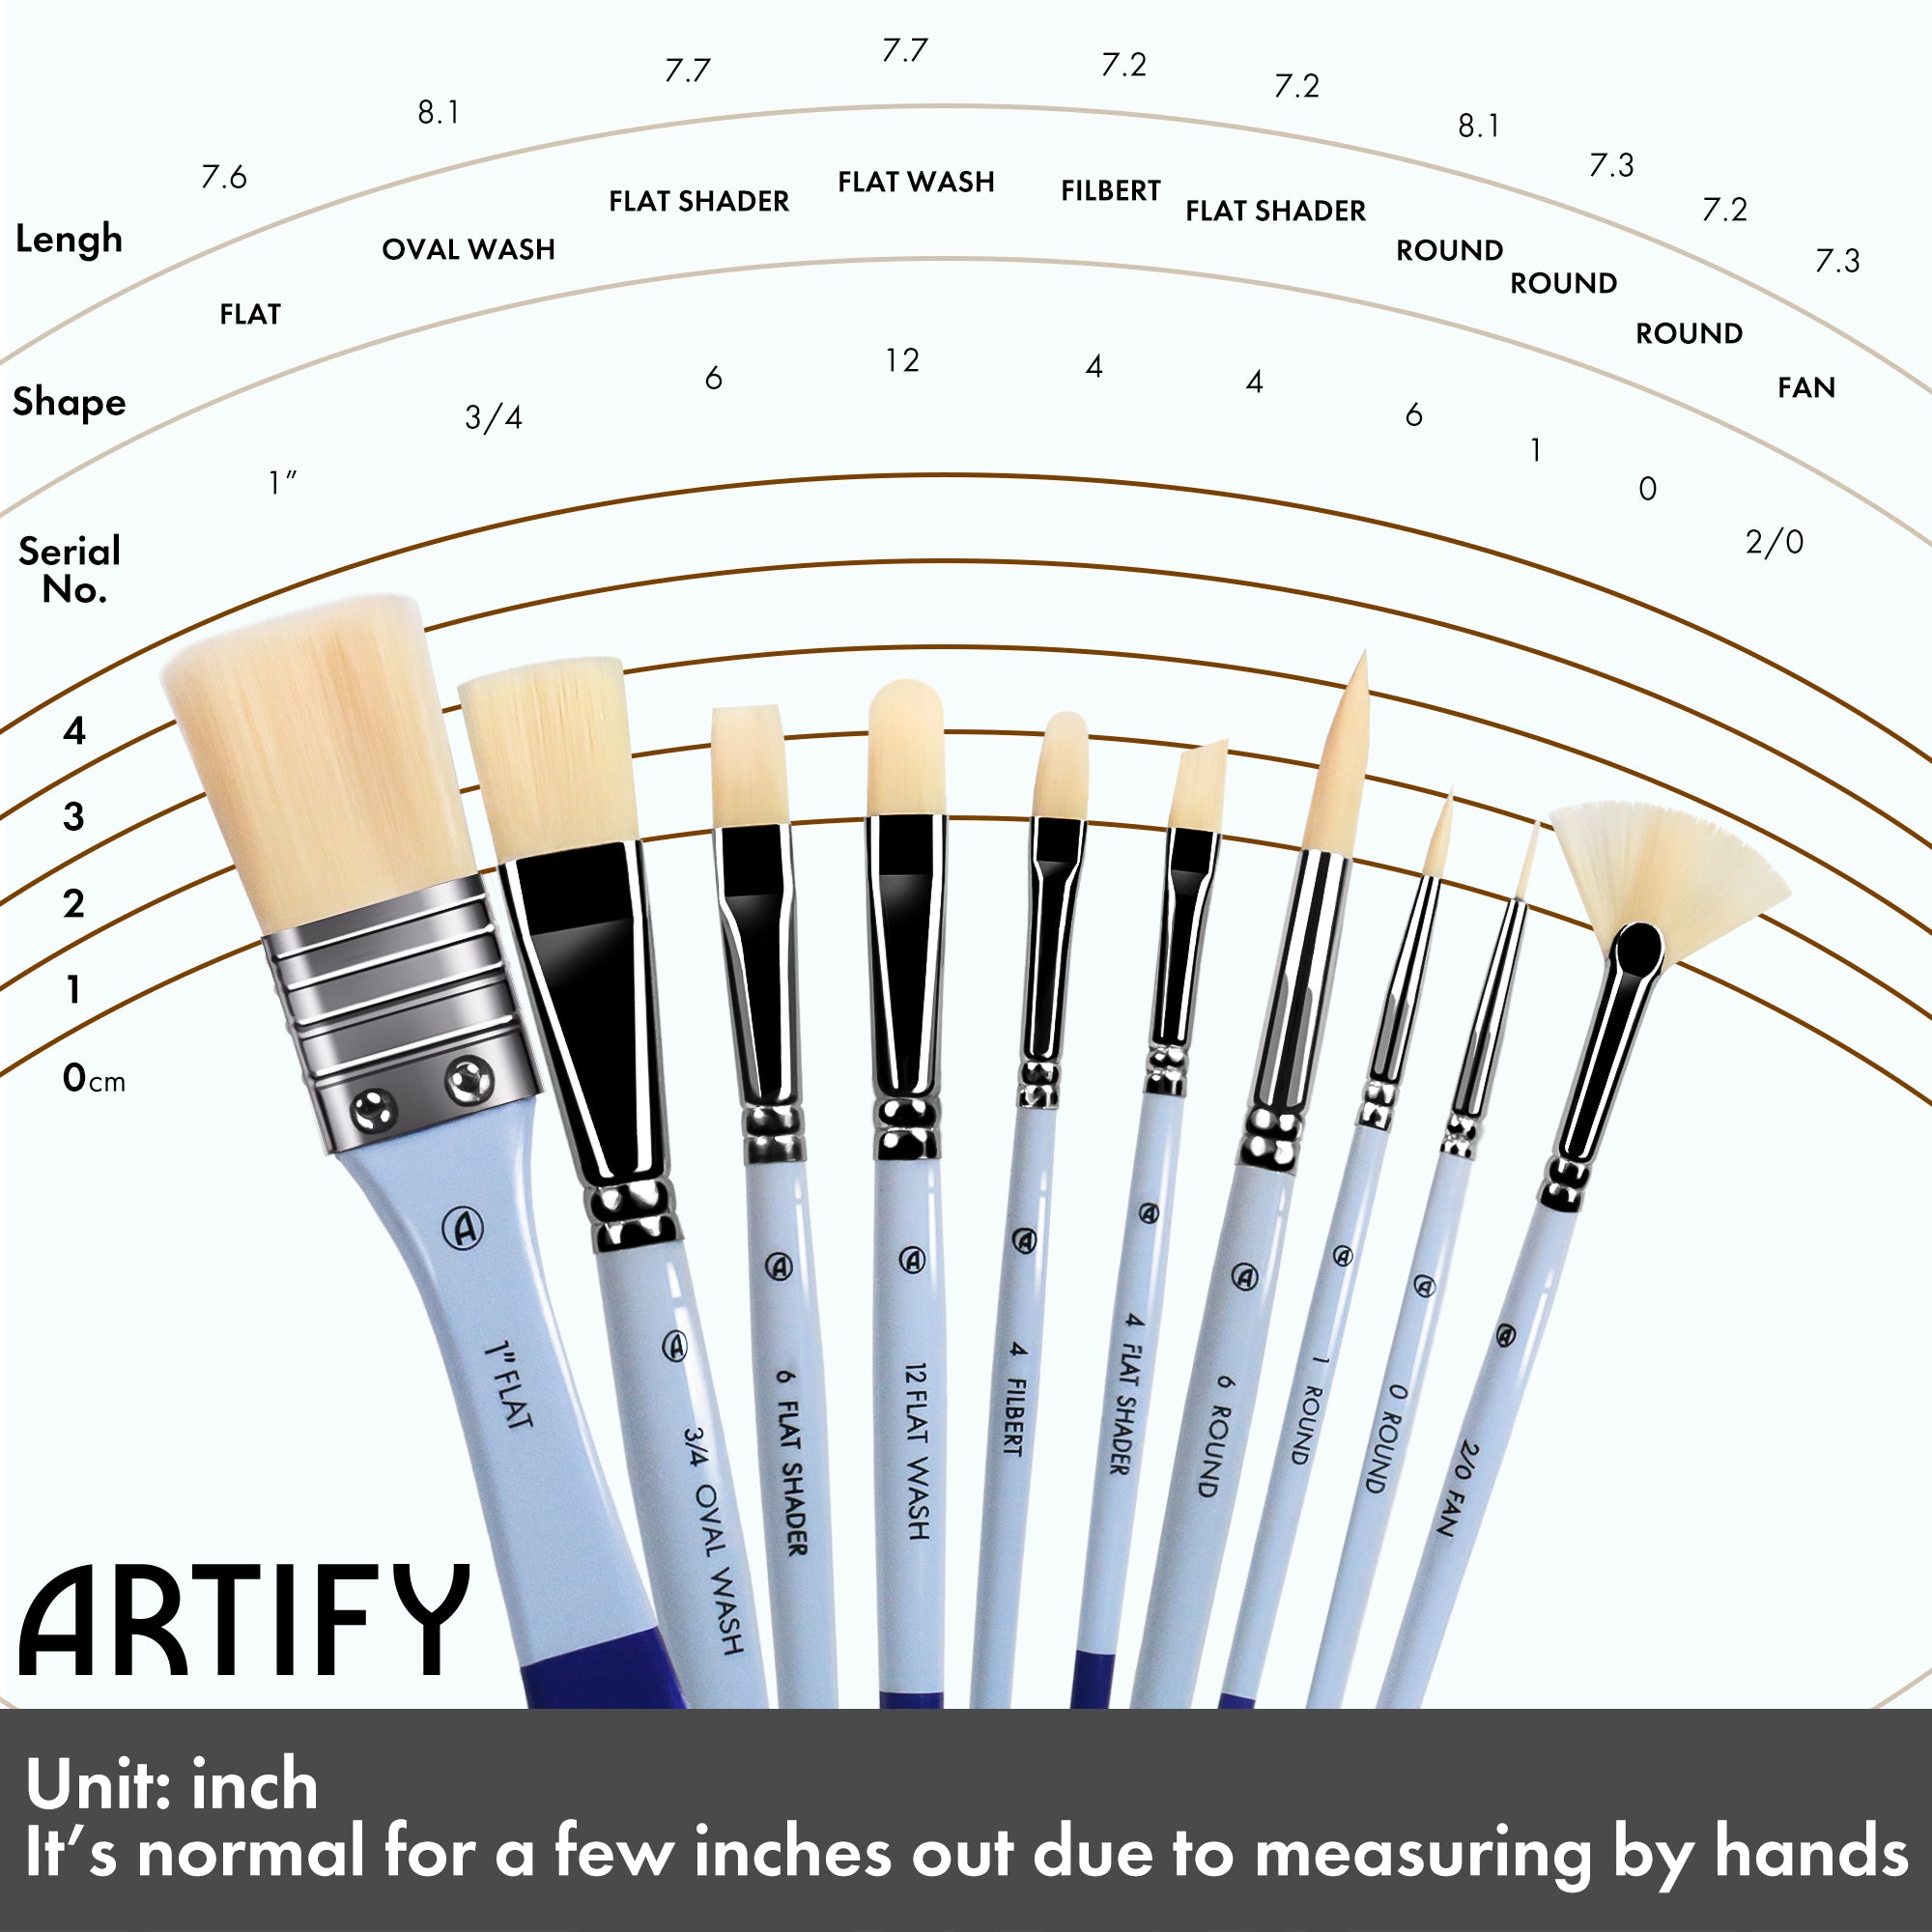 Artify Extreme Detail Paint Brushes, Miniature Paint Brushes for Models,  10pcs Mini Small Paint Brushes for Painting with a Handbag, Miniature  Brushes